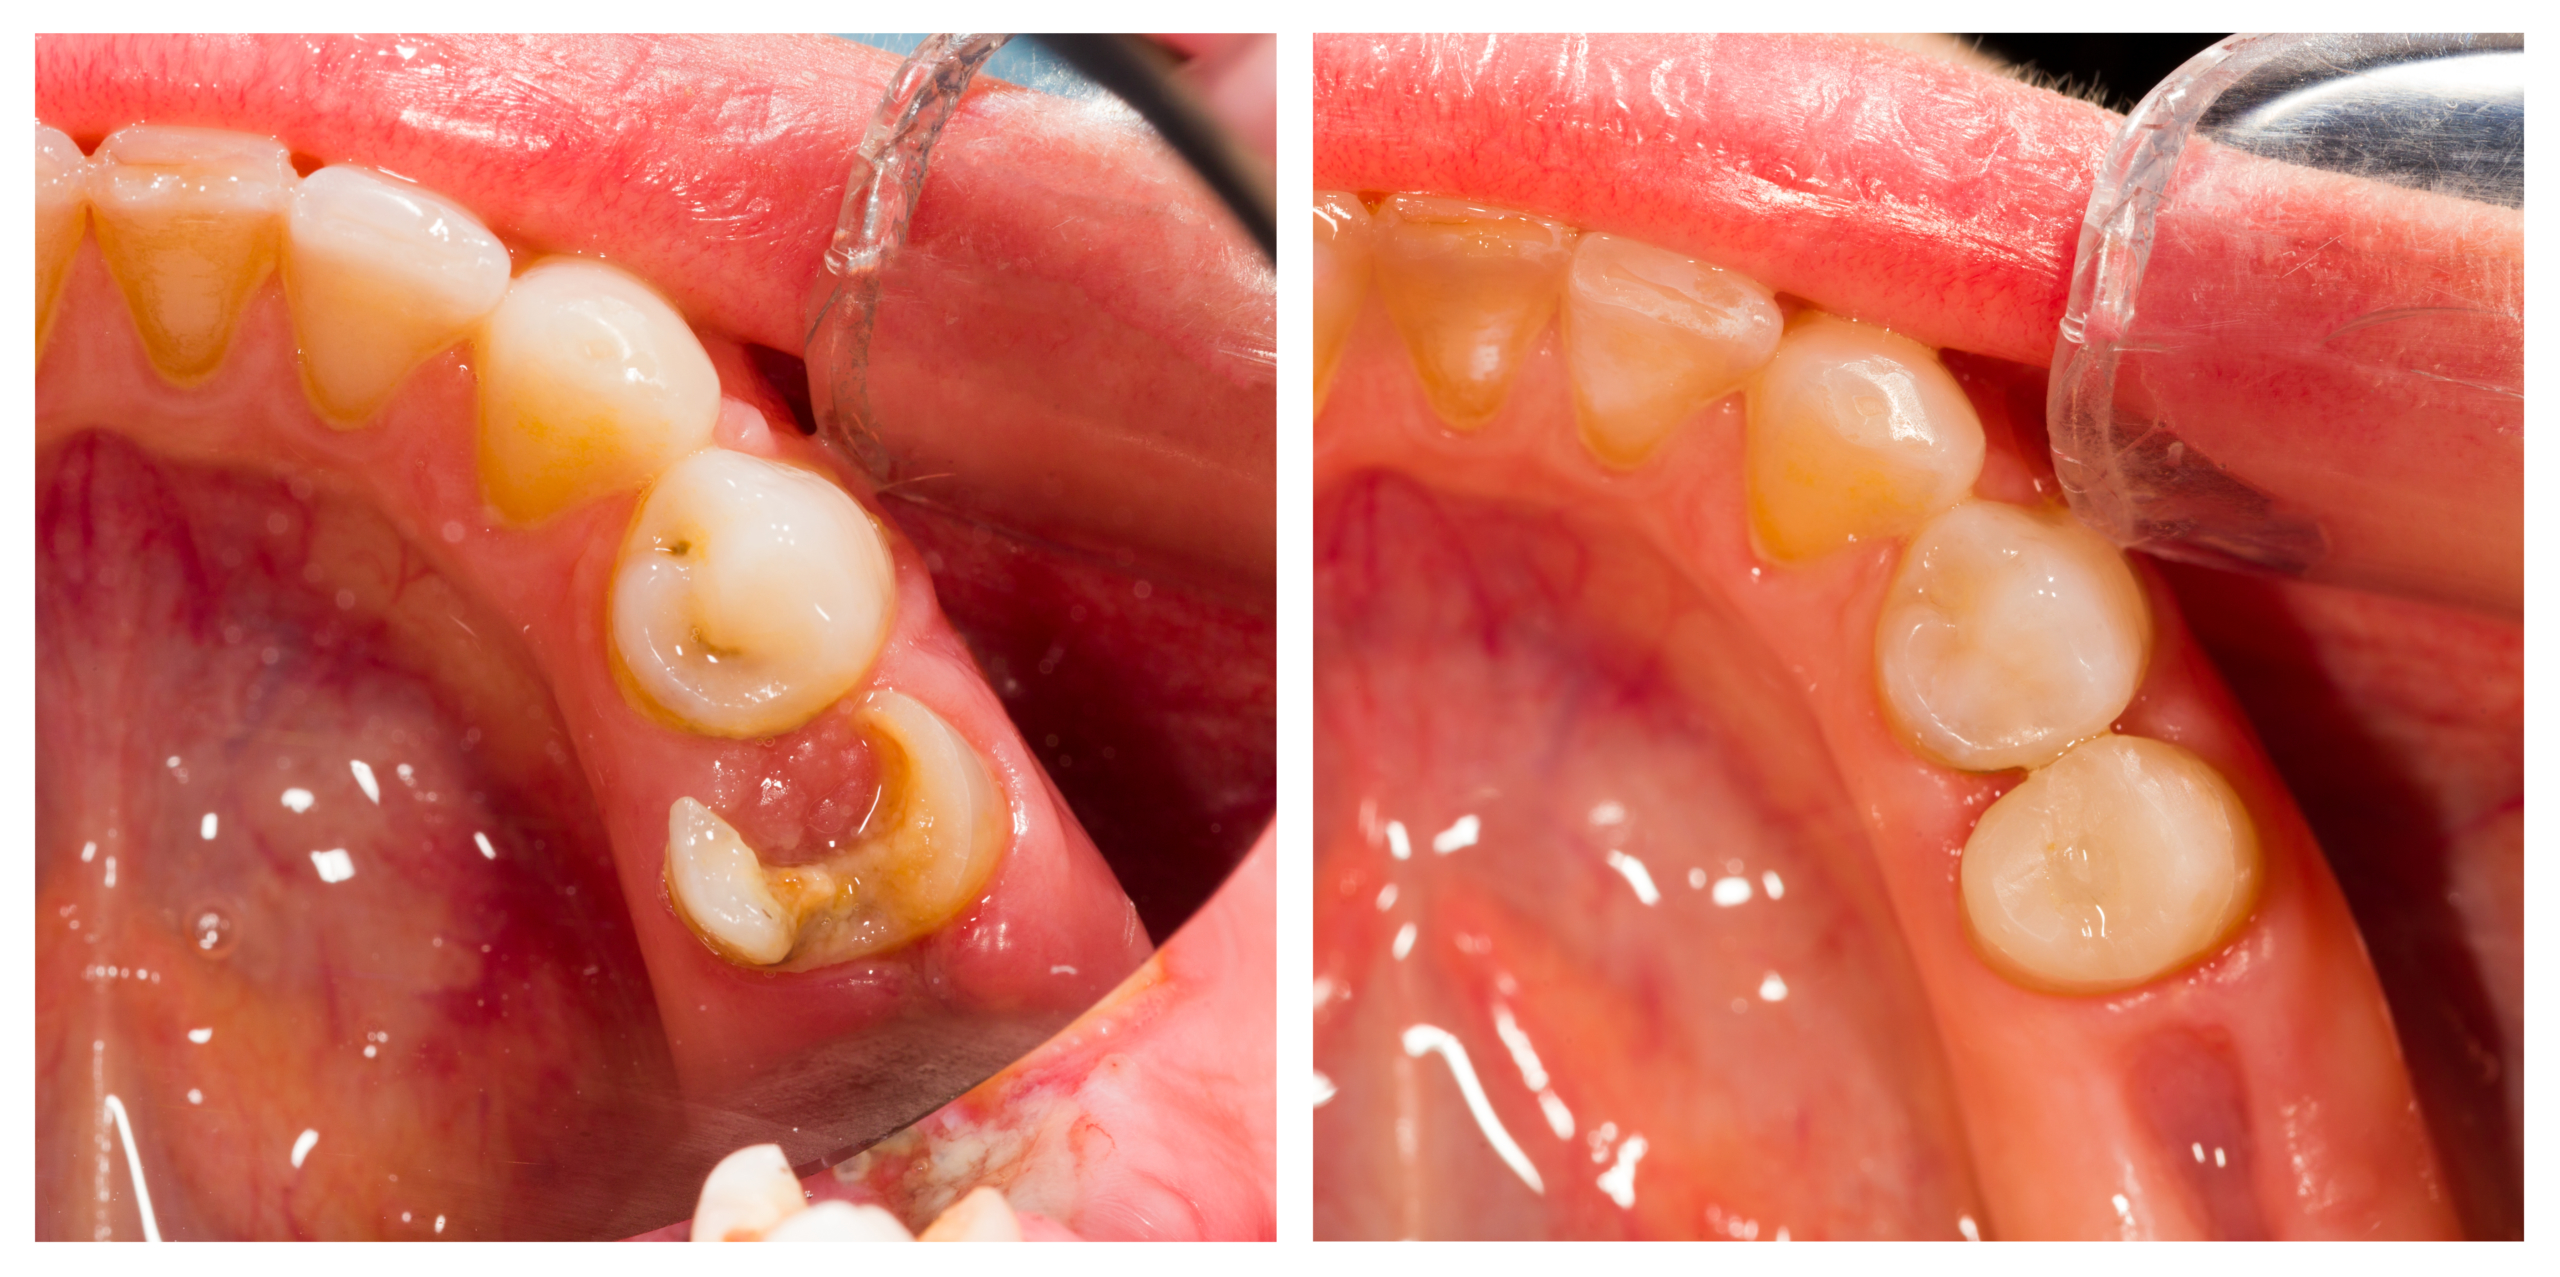 Direct pulp capping of the tooth in cases of pulpitis